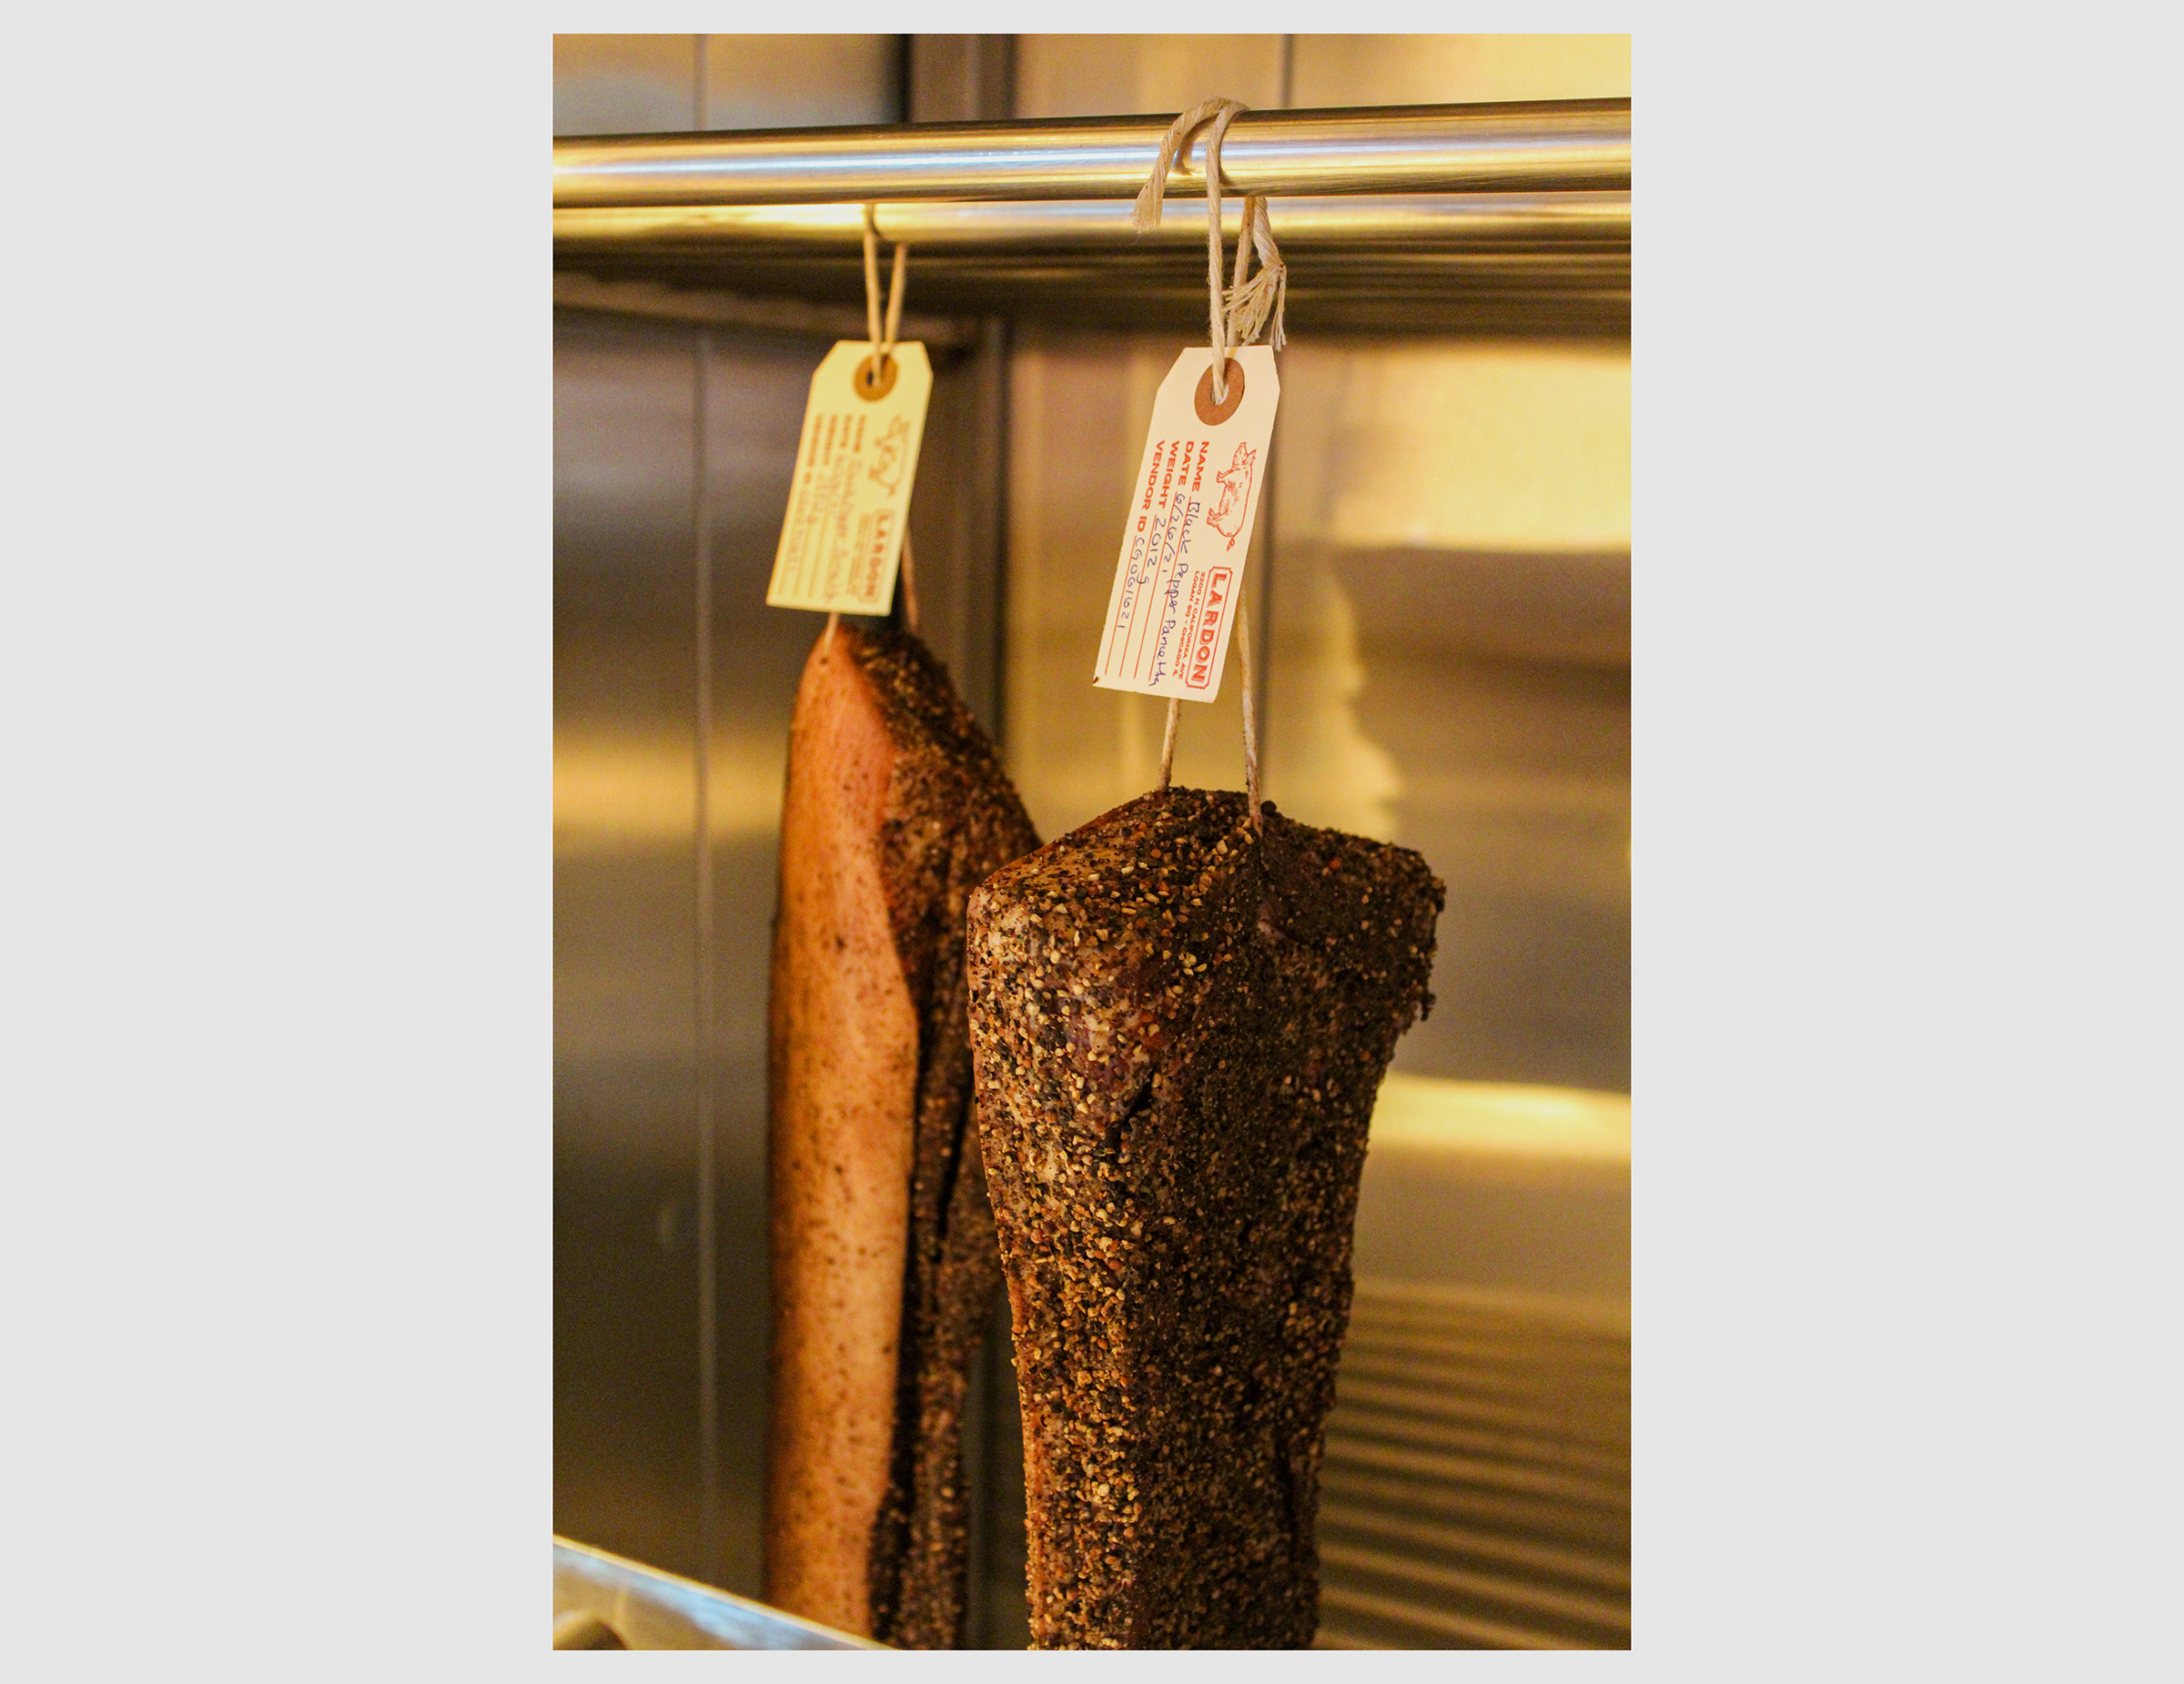 Two pieces of black pepper pancetta hang in the curing room at Lardon